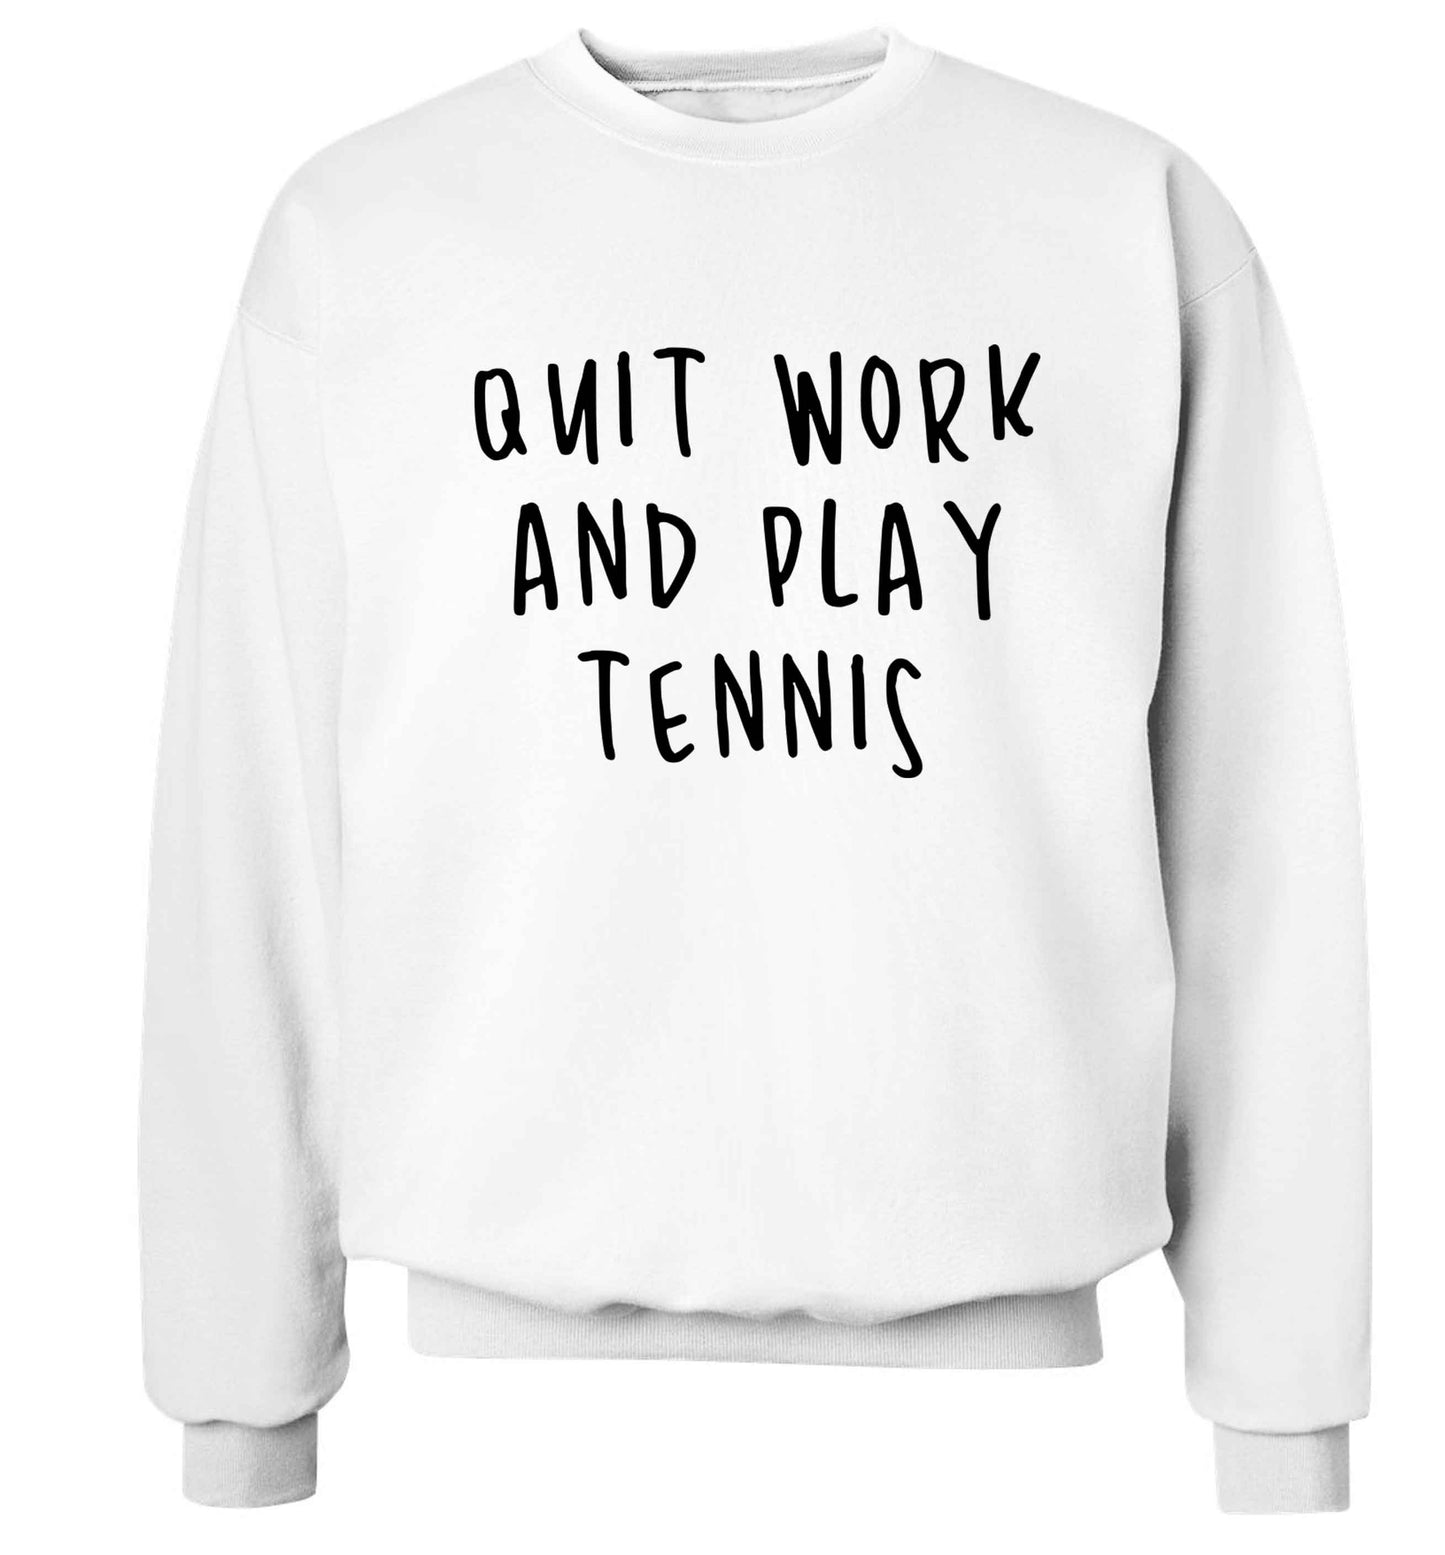 Quit work and play tennis Adult's unisex white Sweater 2XL